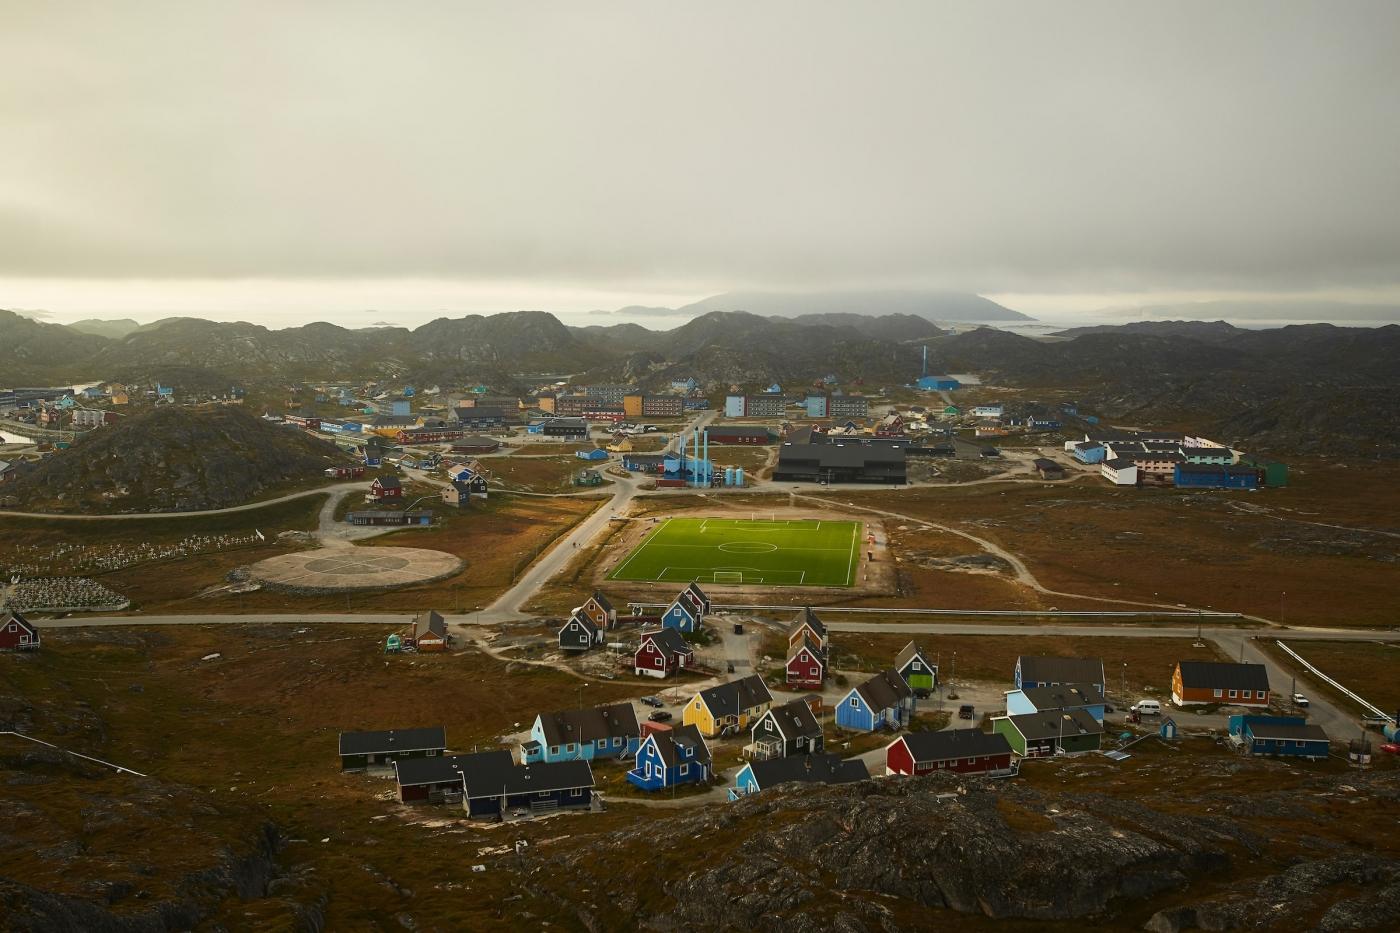 Panorama over soccer field in Paamiut. Photo by Peter Lindstrom - Visit Greenland